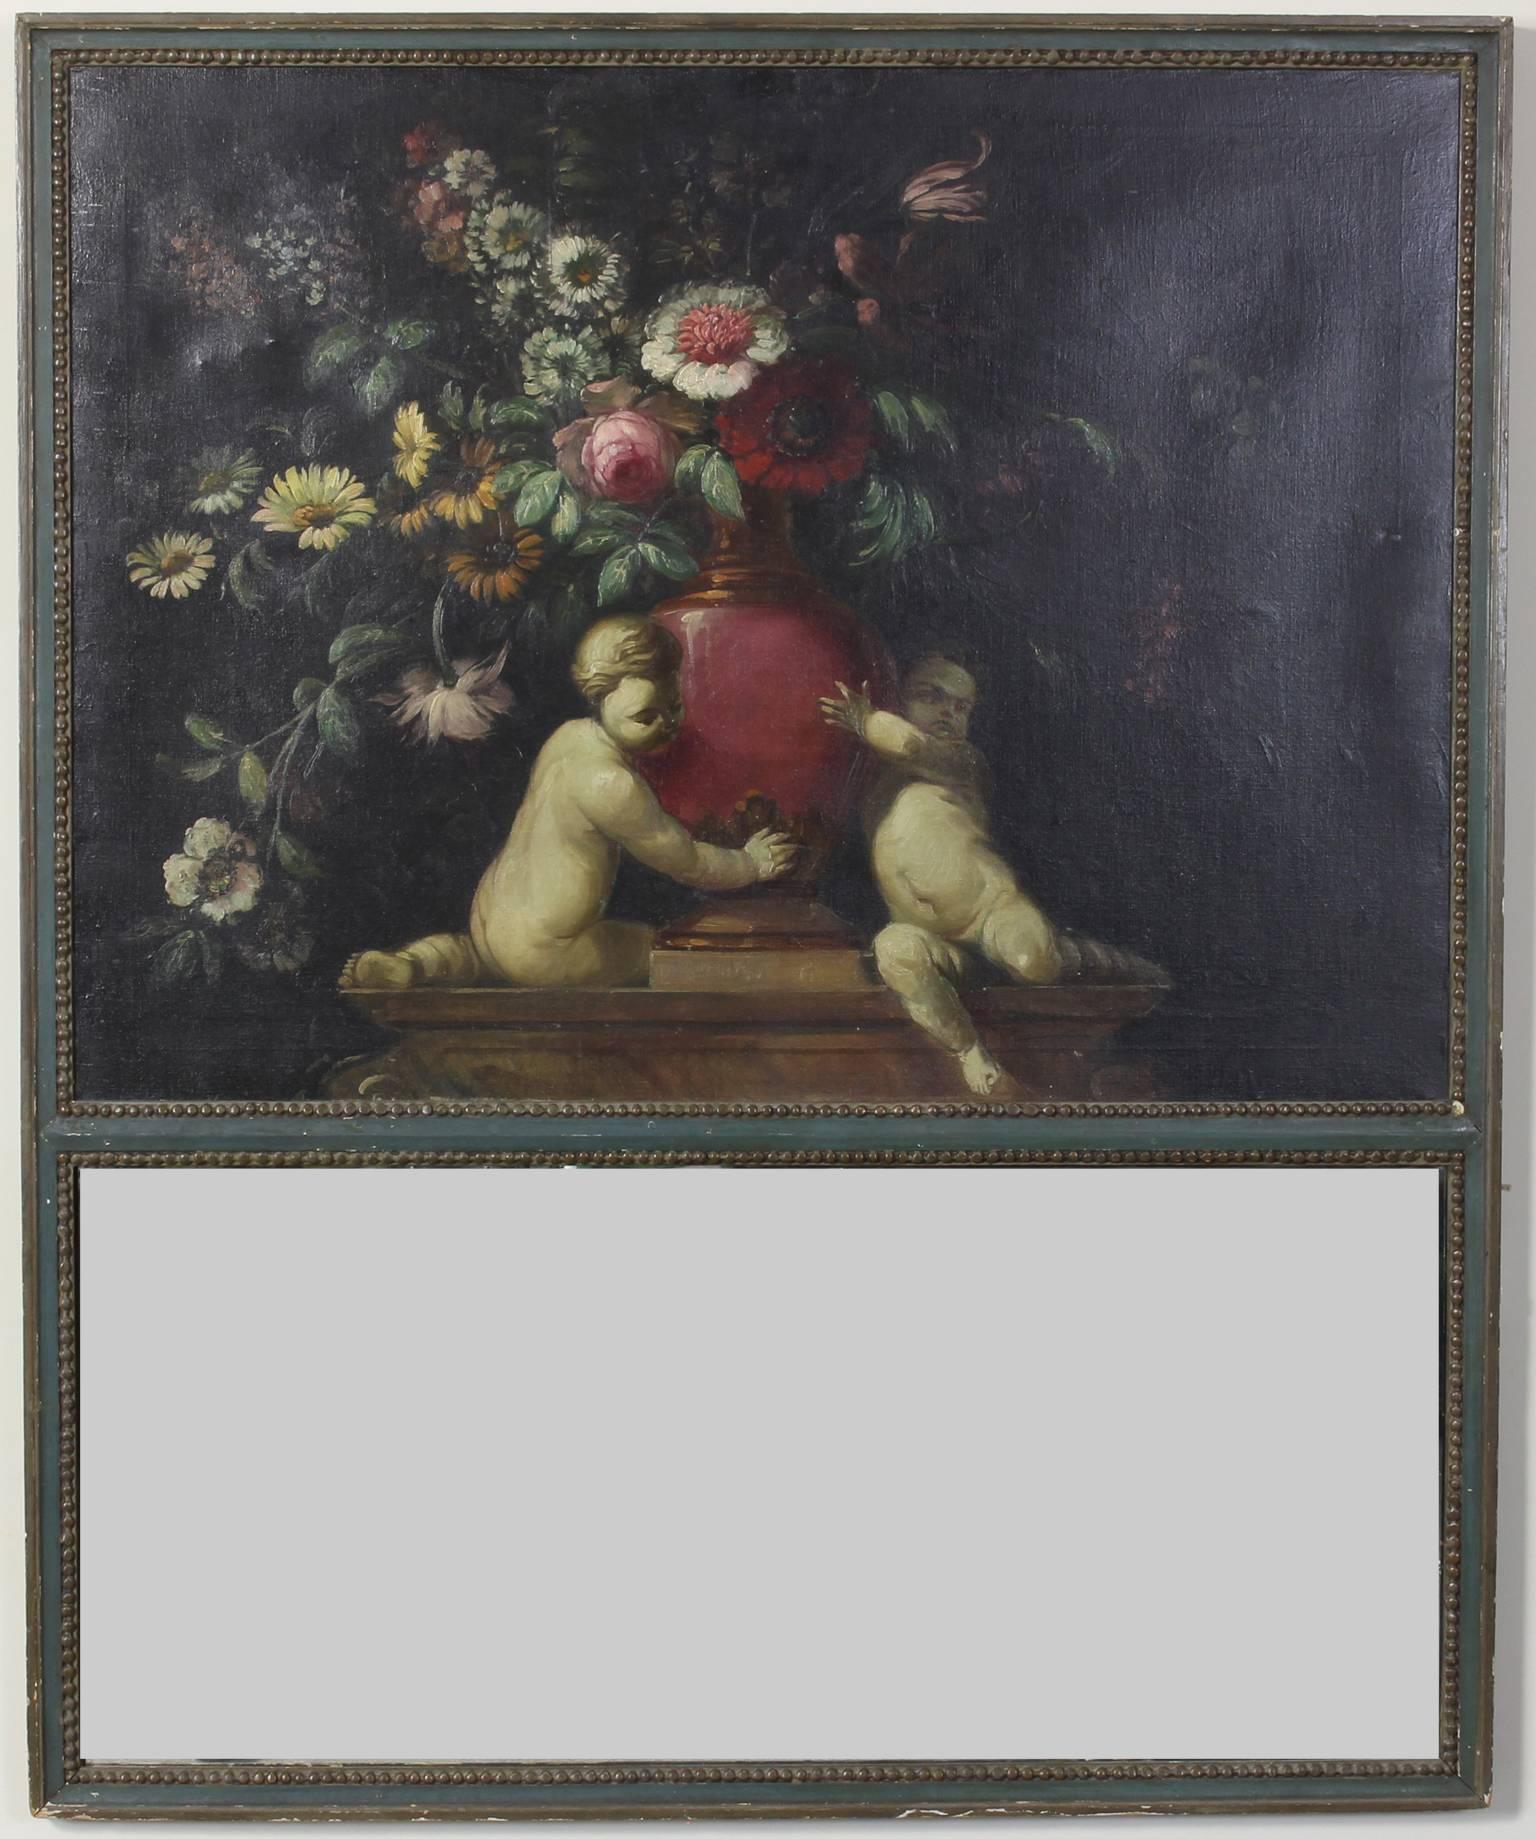 A large late 19th century French trumeau mirror. The upper painting depicting Putti holding a vase of flowers, the lower panel holds a mirror.